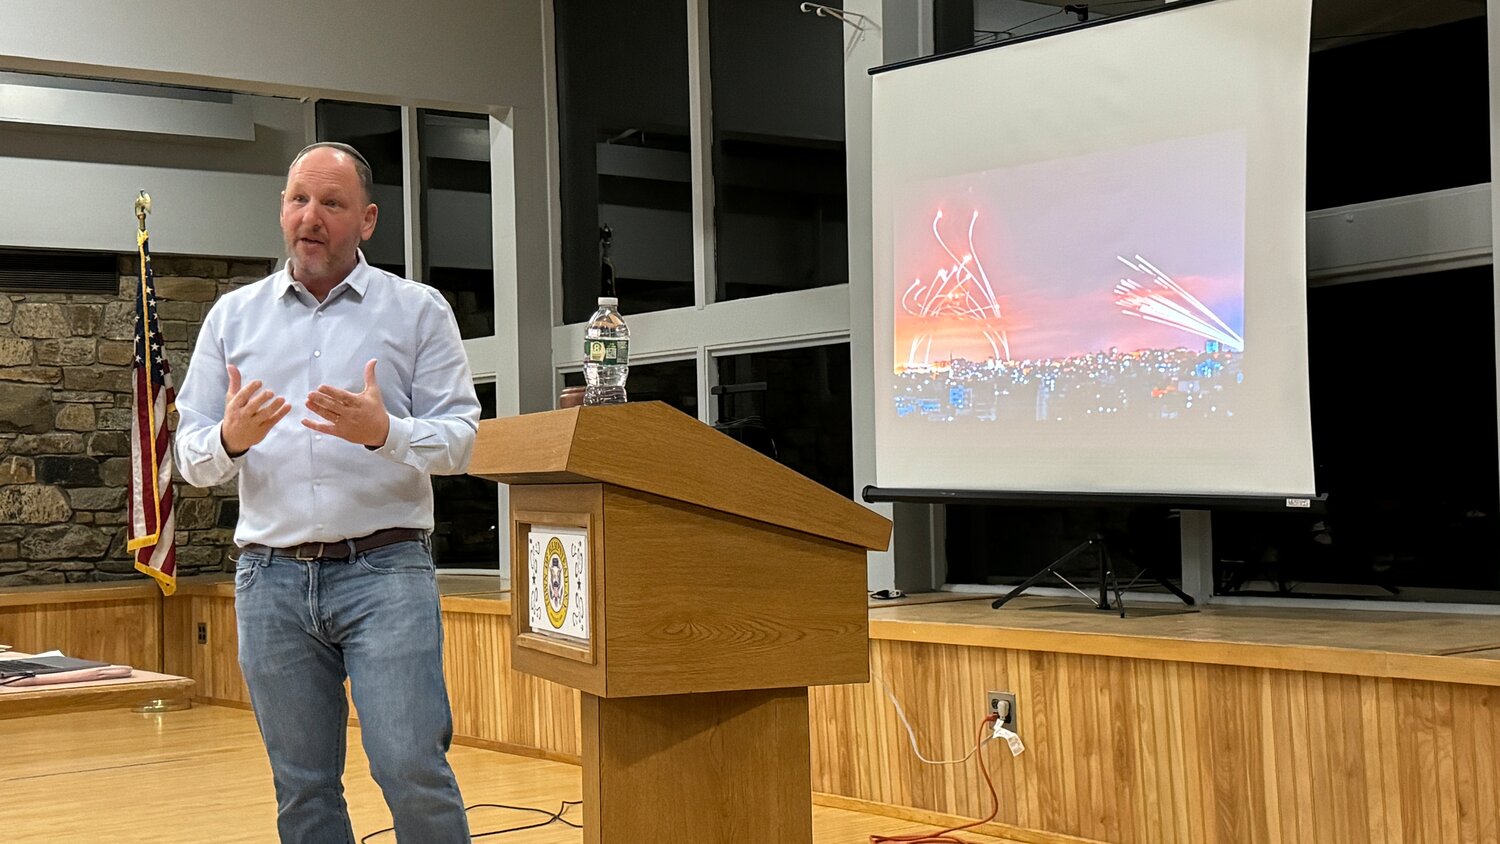 David Sussman, of David Sussman Israel Tours, gave an informative presentation during the Jan. 17 meeting of the South Merrick Community Civic Association. A resident of Israel for nearly two decades, he spoke about what it was like to experience the Oct. 7 attack by Hamas.